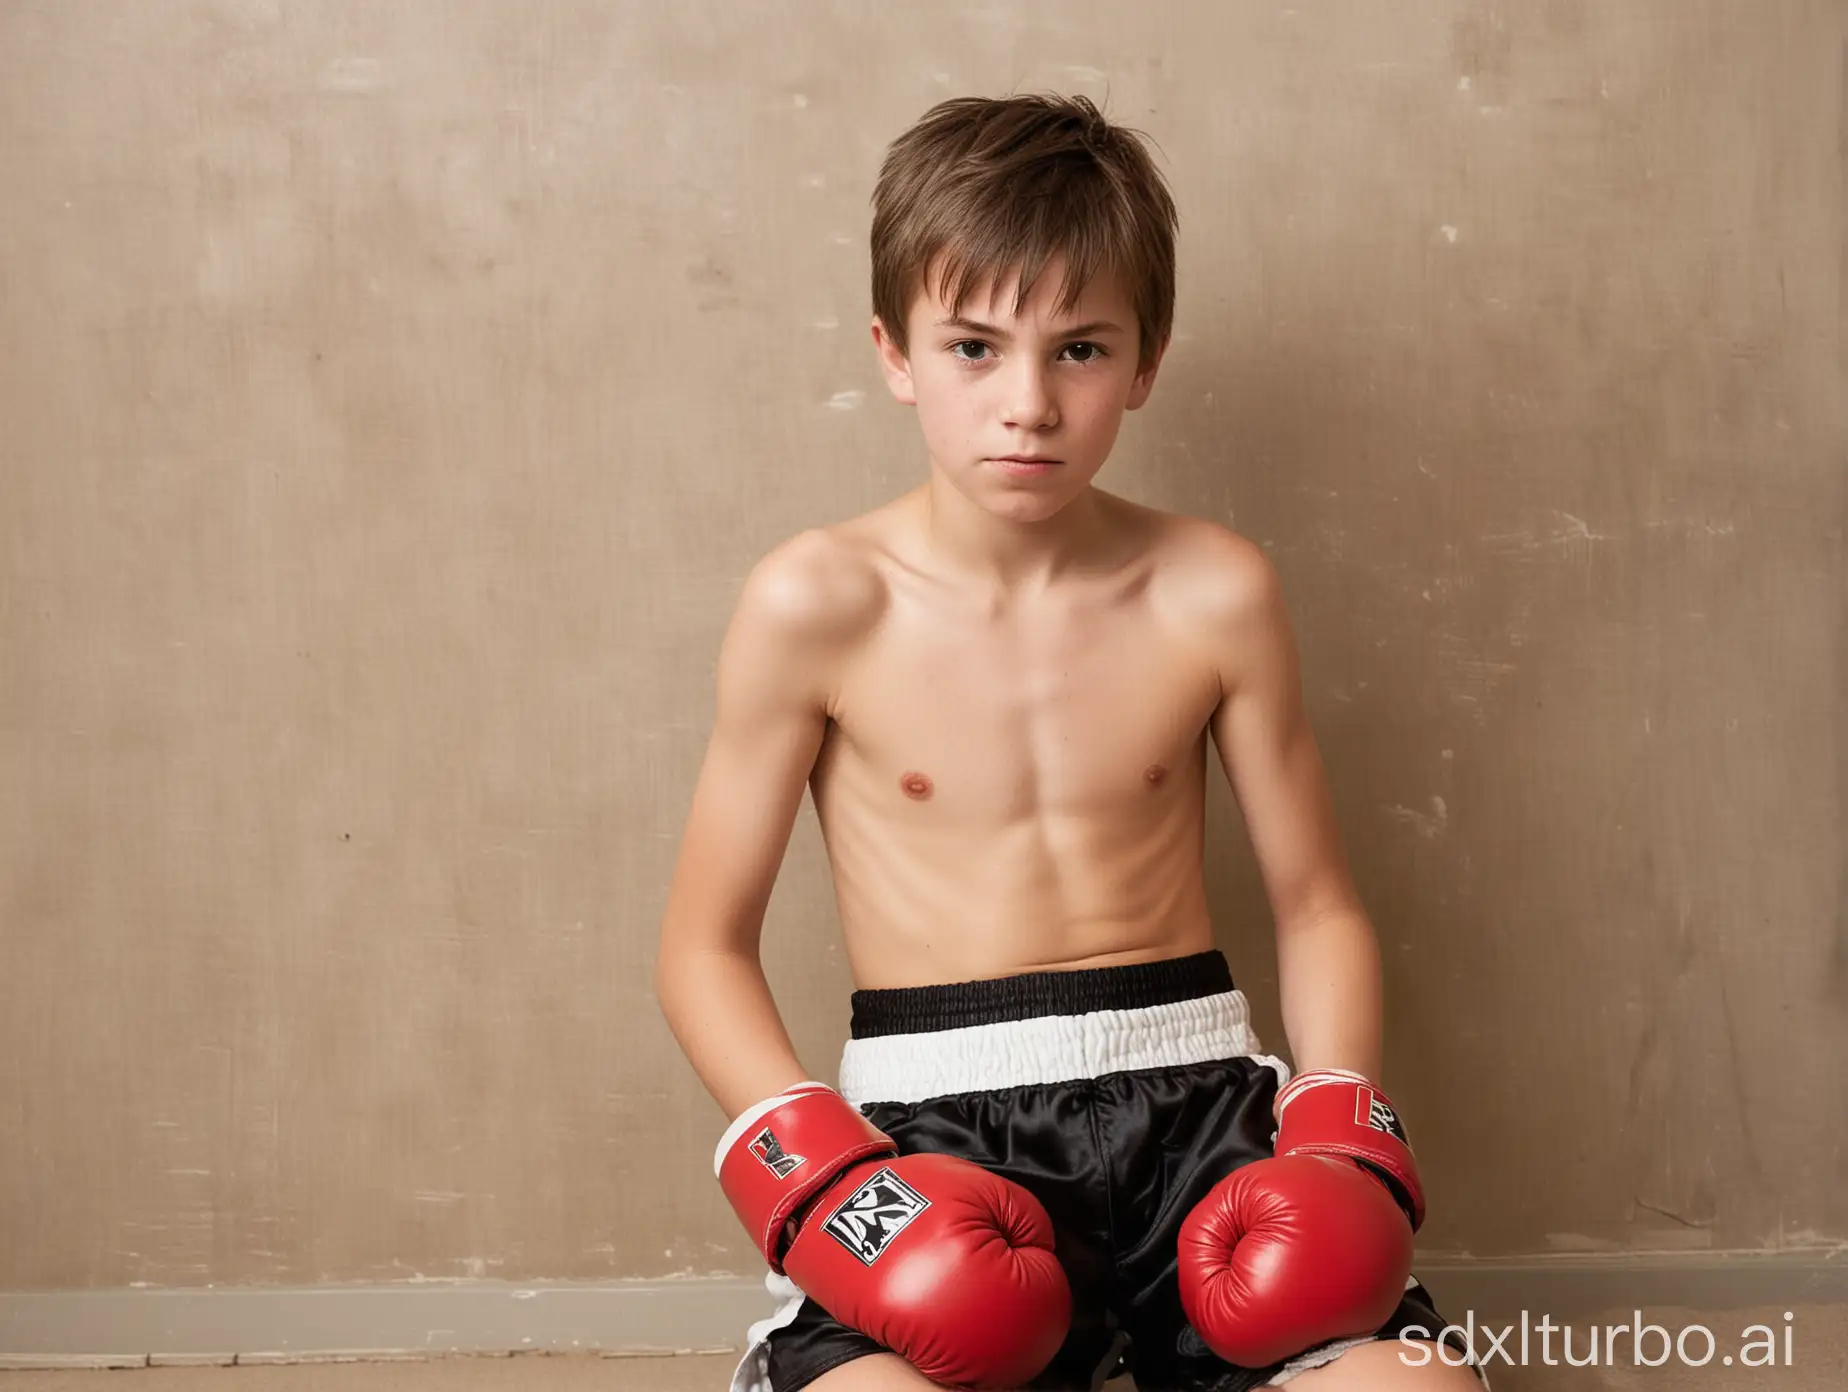 young shirtless boy boxer knocked out